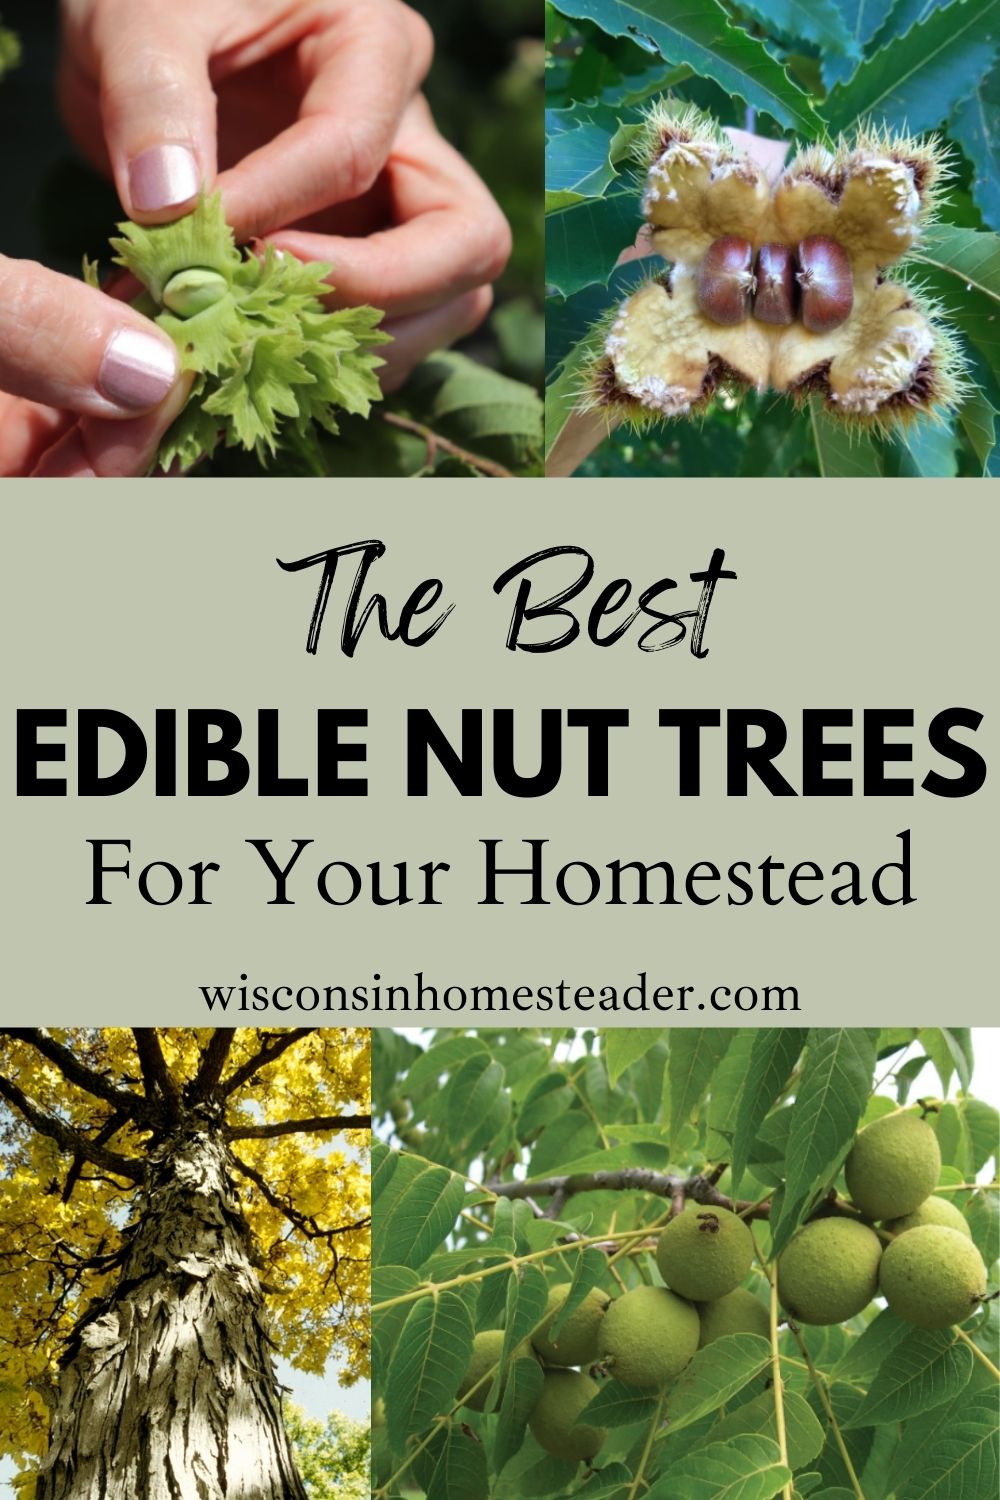 Edible nut trees to add to a homestead